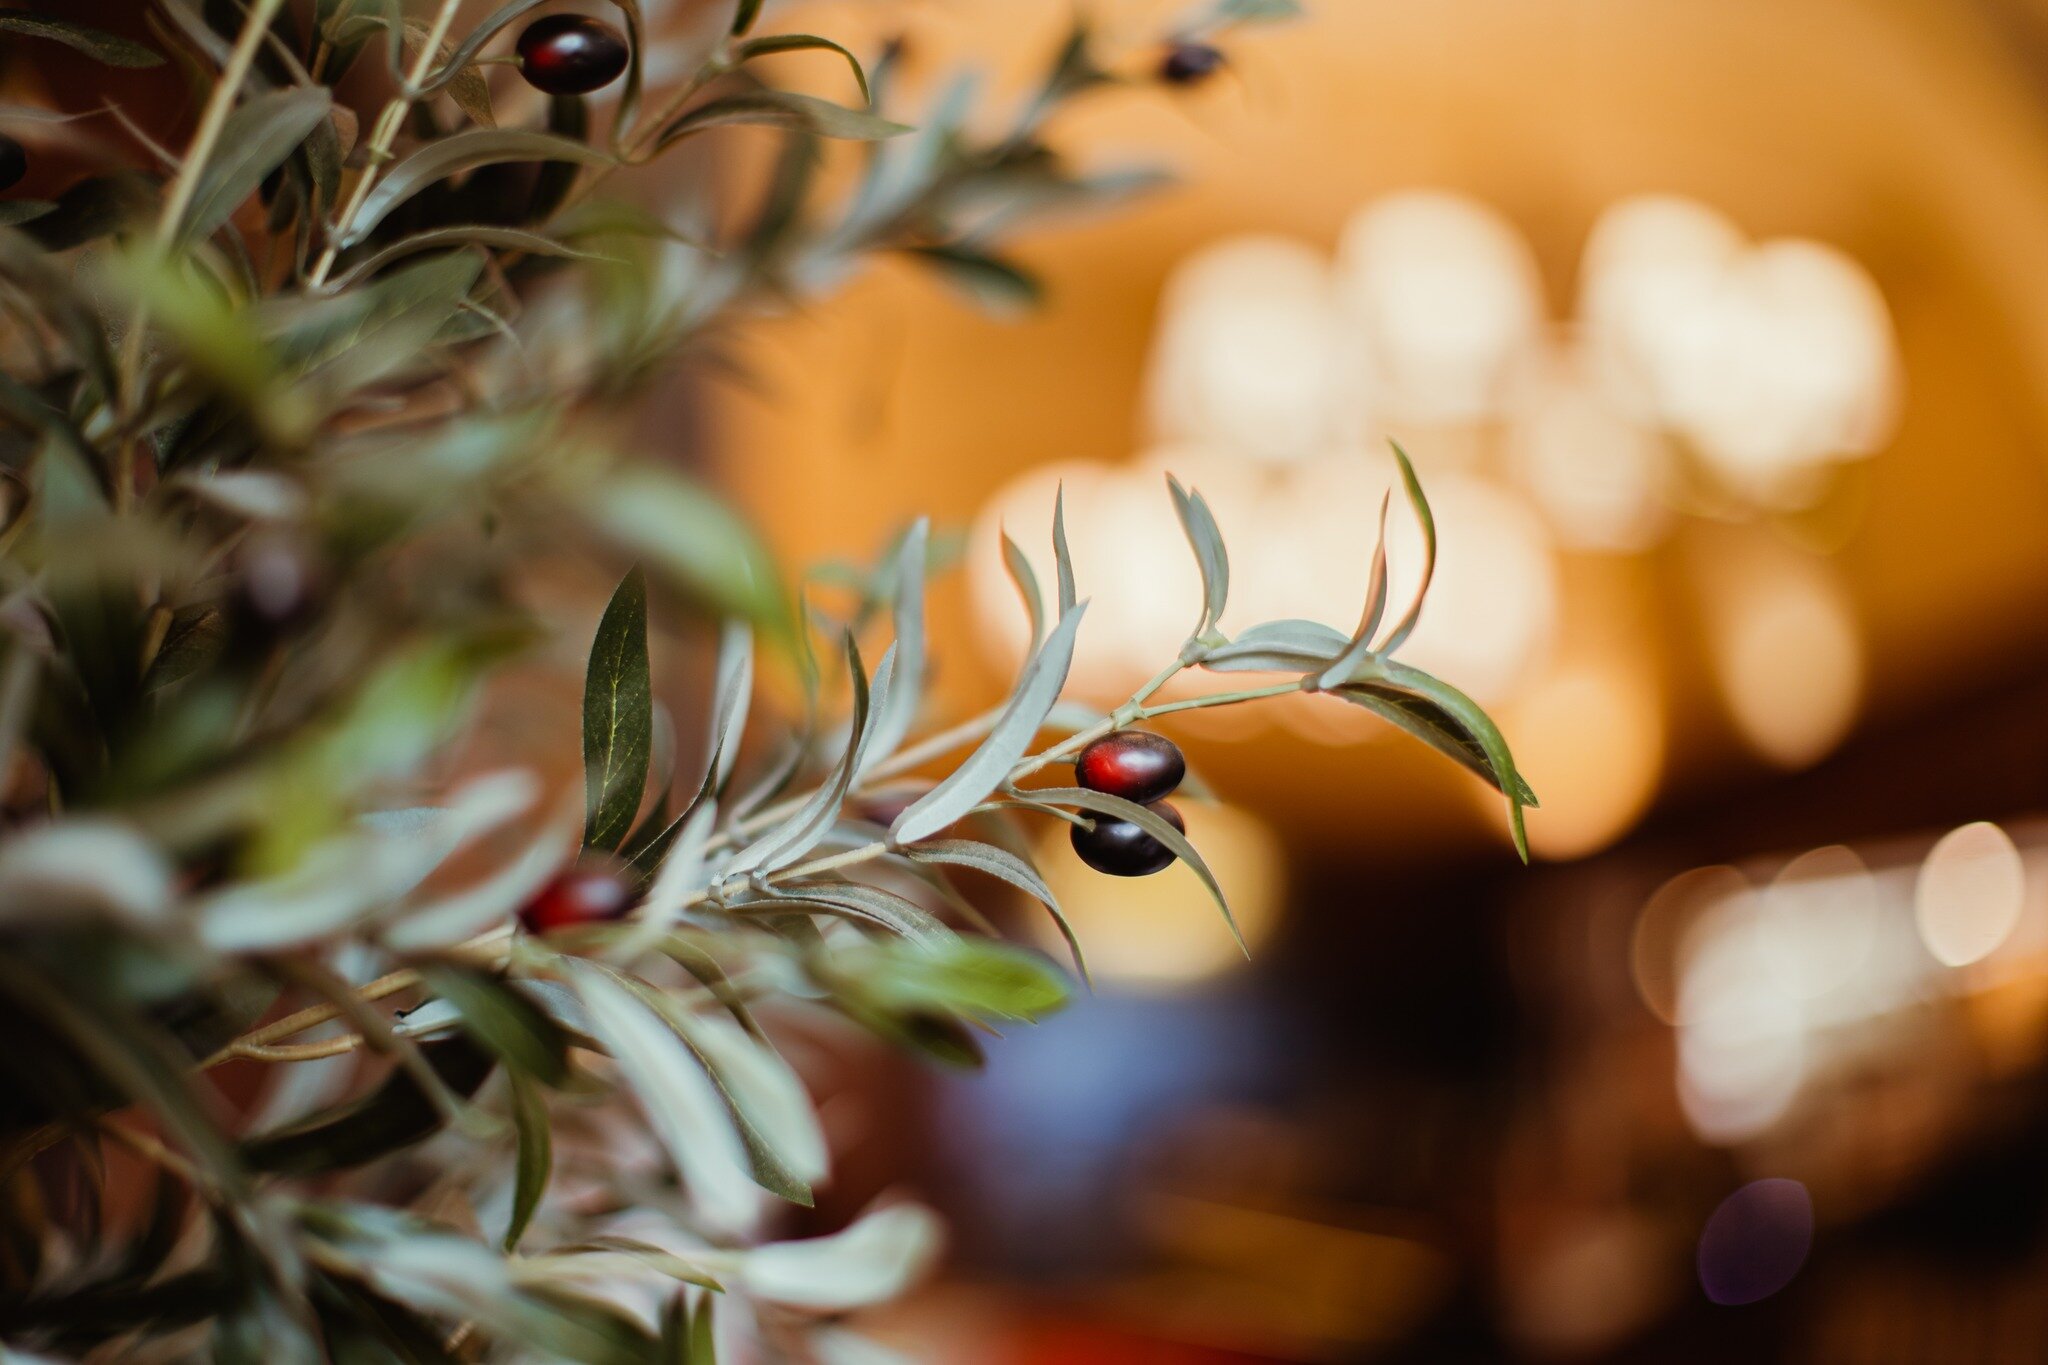 While the olive tree symbolizes stability and tranquility or the eternal link between man and the earth, the olive branch is an offer of peace and friendship. 

We chose it as our main motif because it represents how our guests feel when they enter o